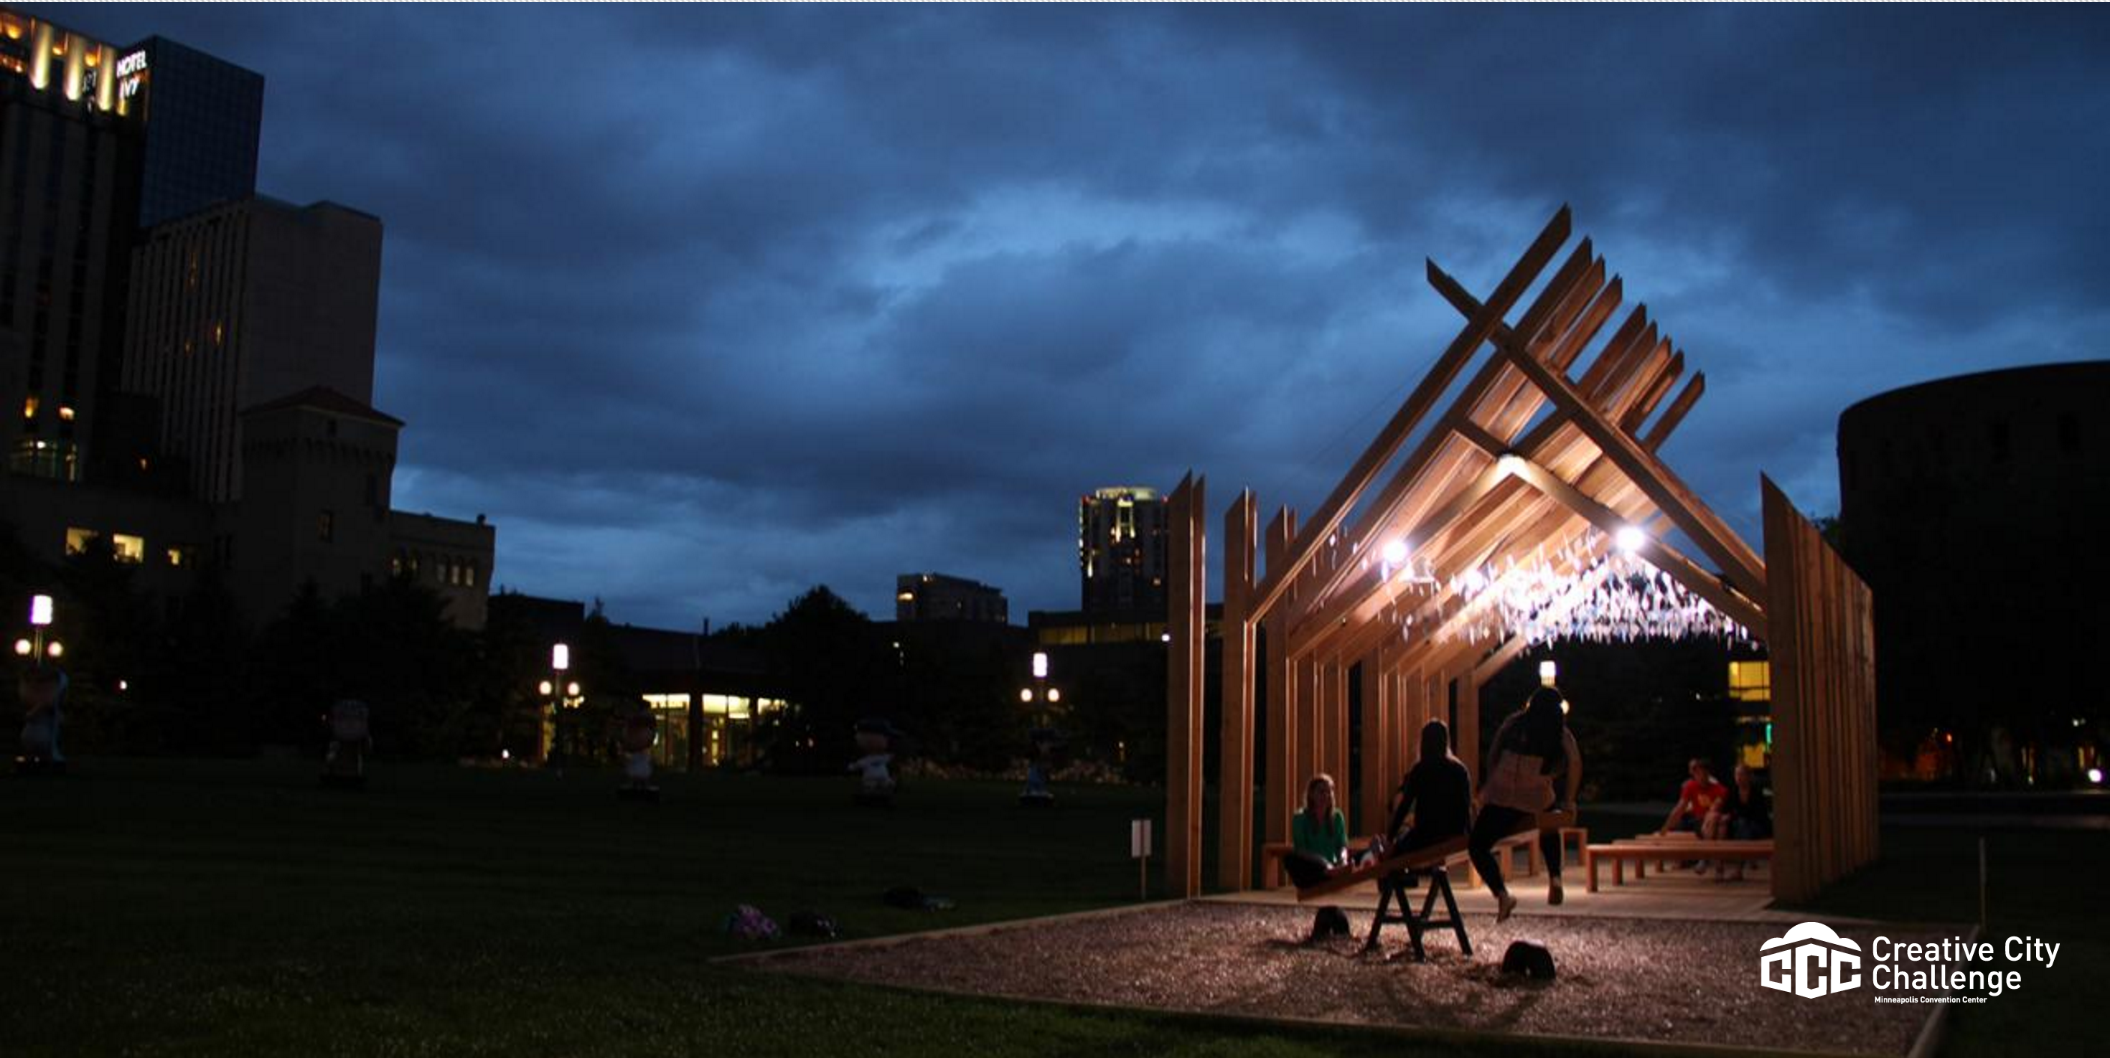 A wooden structure at night